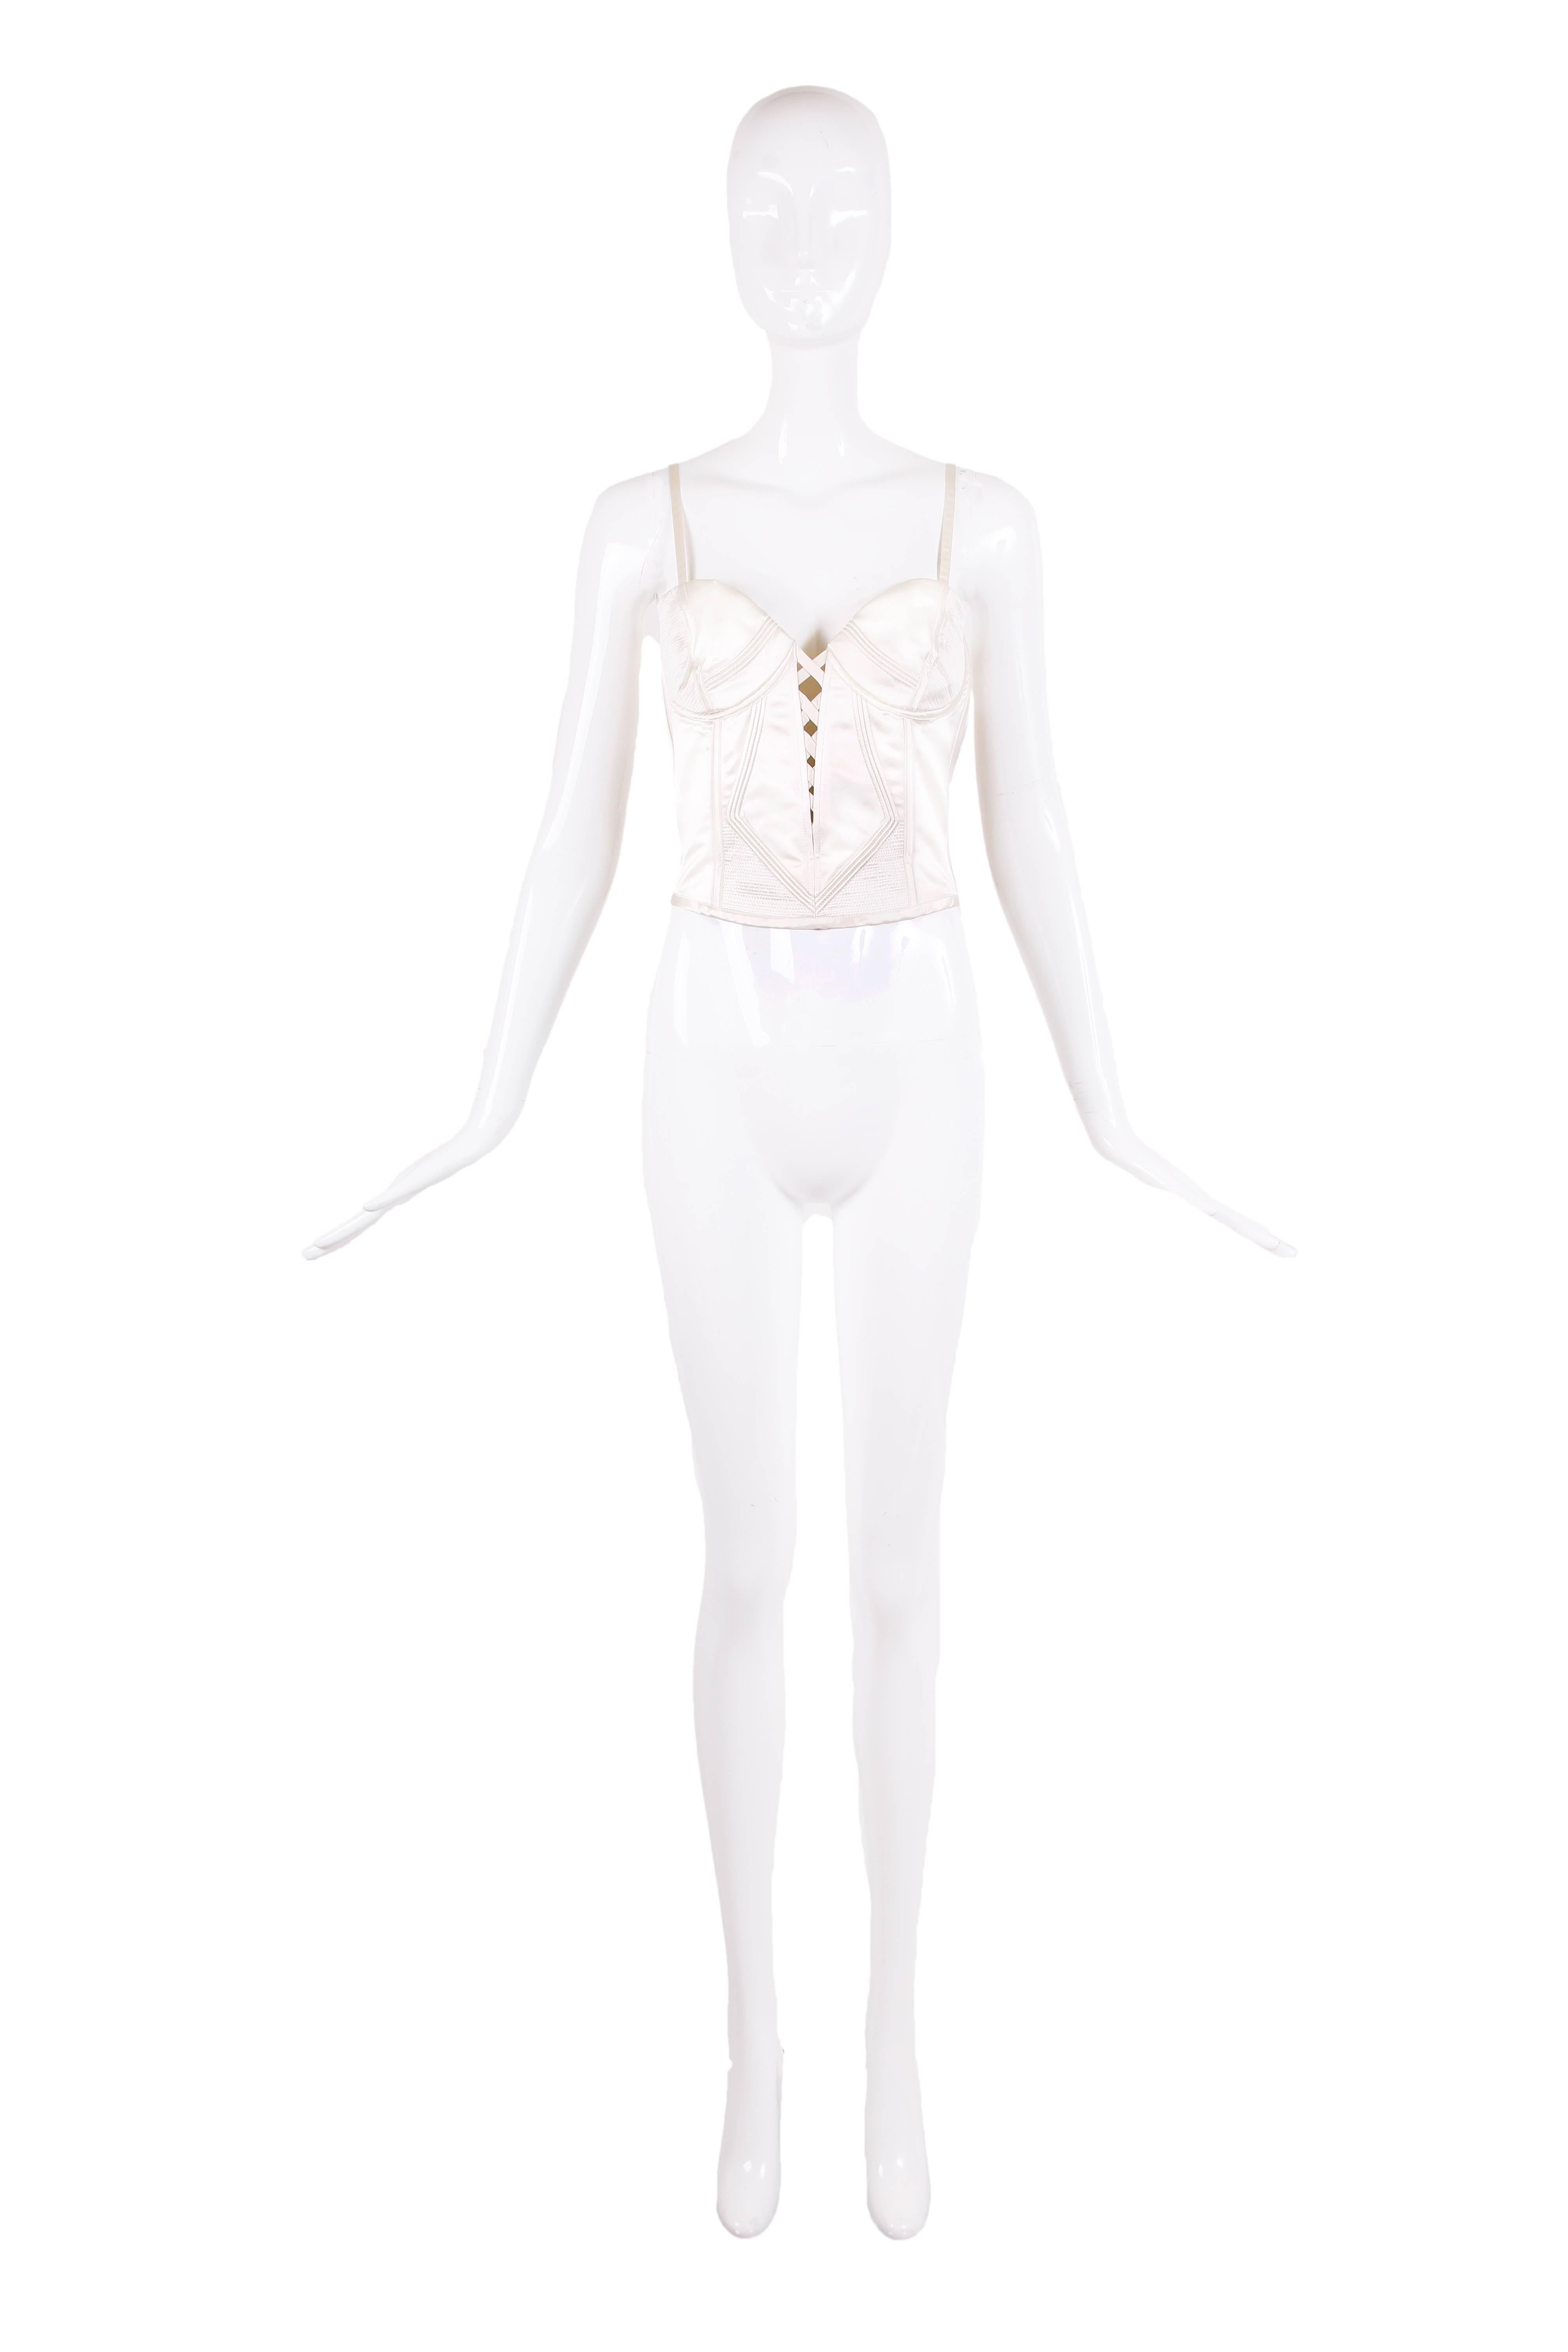 1995 Gianni Versace with Bergdorf Goodman label ivory satin bustier with overstitching and trapunto detailing at front and back. Details include hidden side zipper closure, interior boning and lace up design at front. In excellent condition -